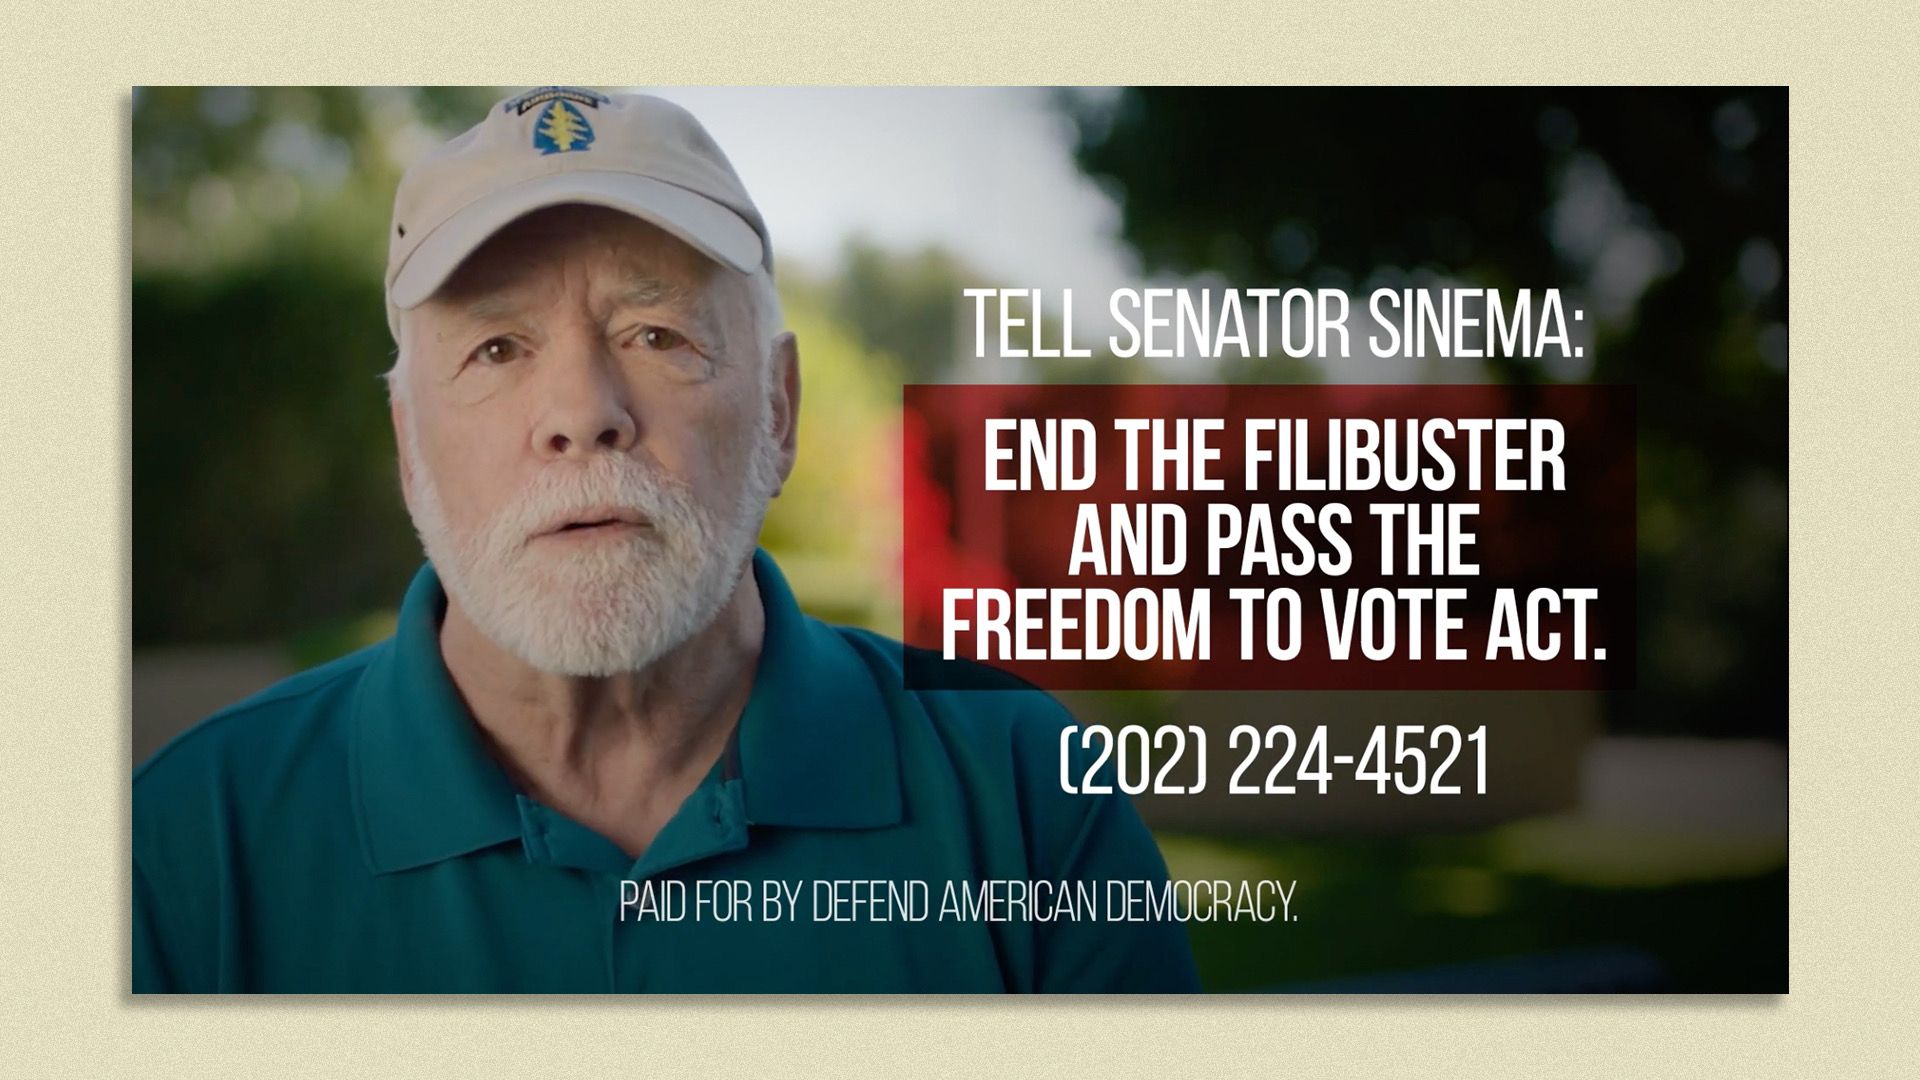 A veteran urges Senator Sinema to end the filibuster and pass the Freedom to Vote Act. 